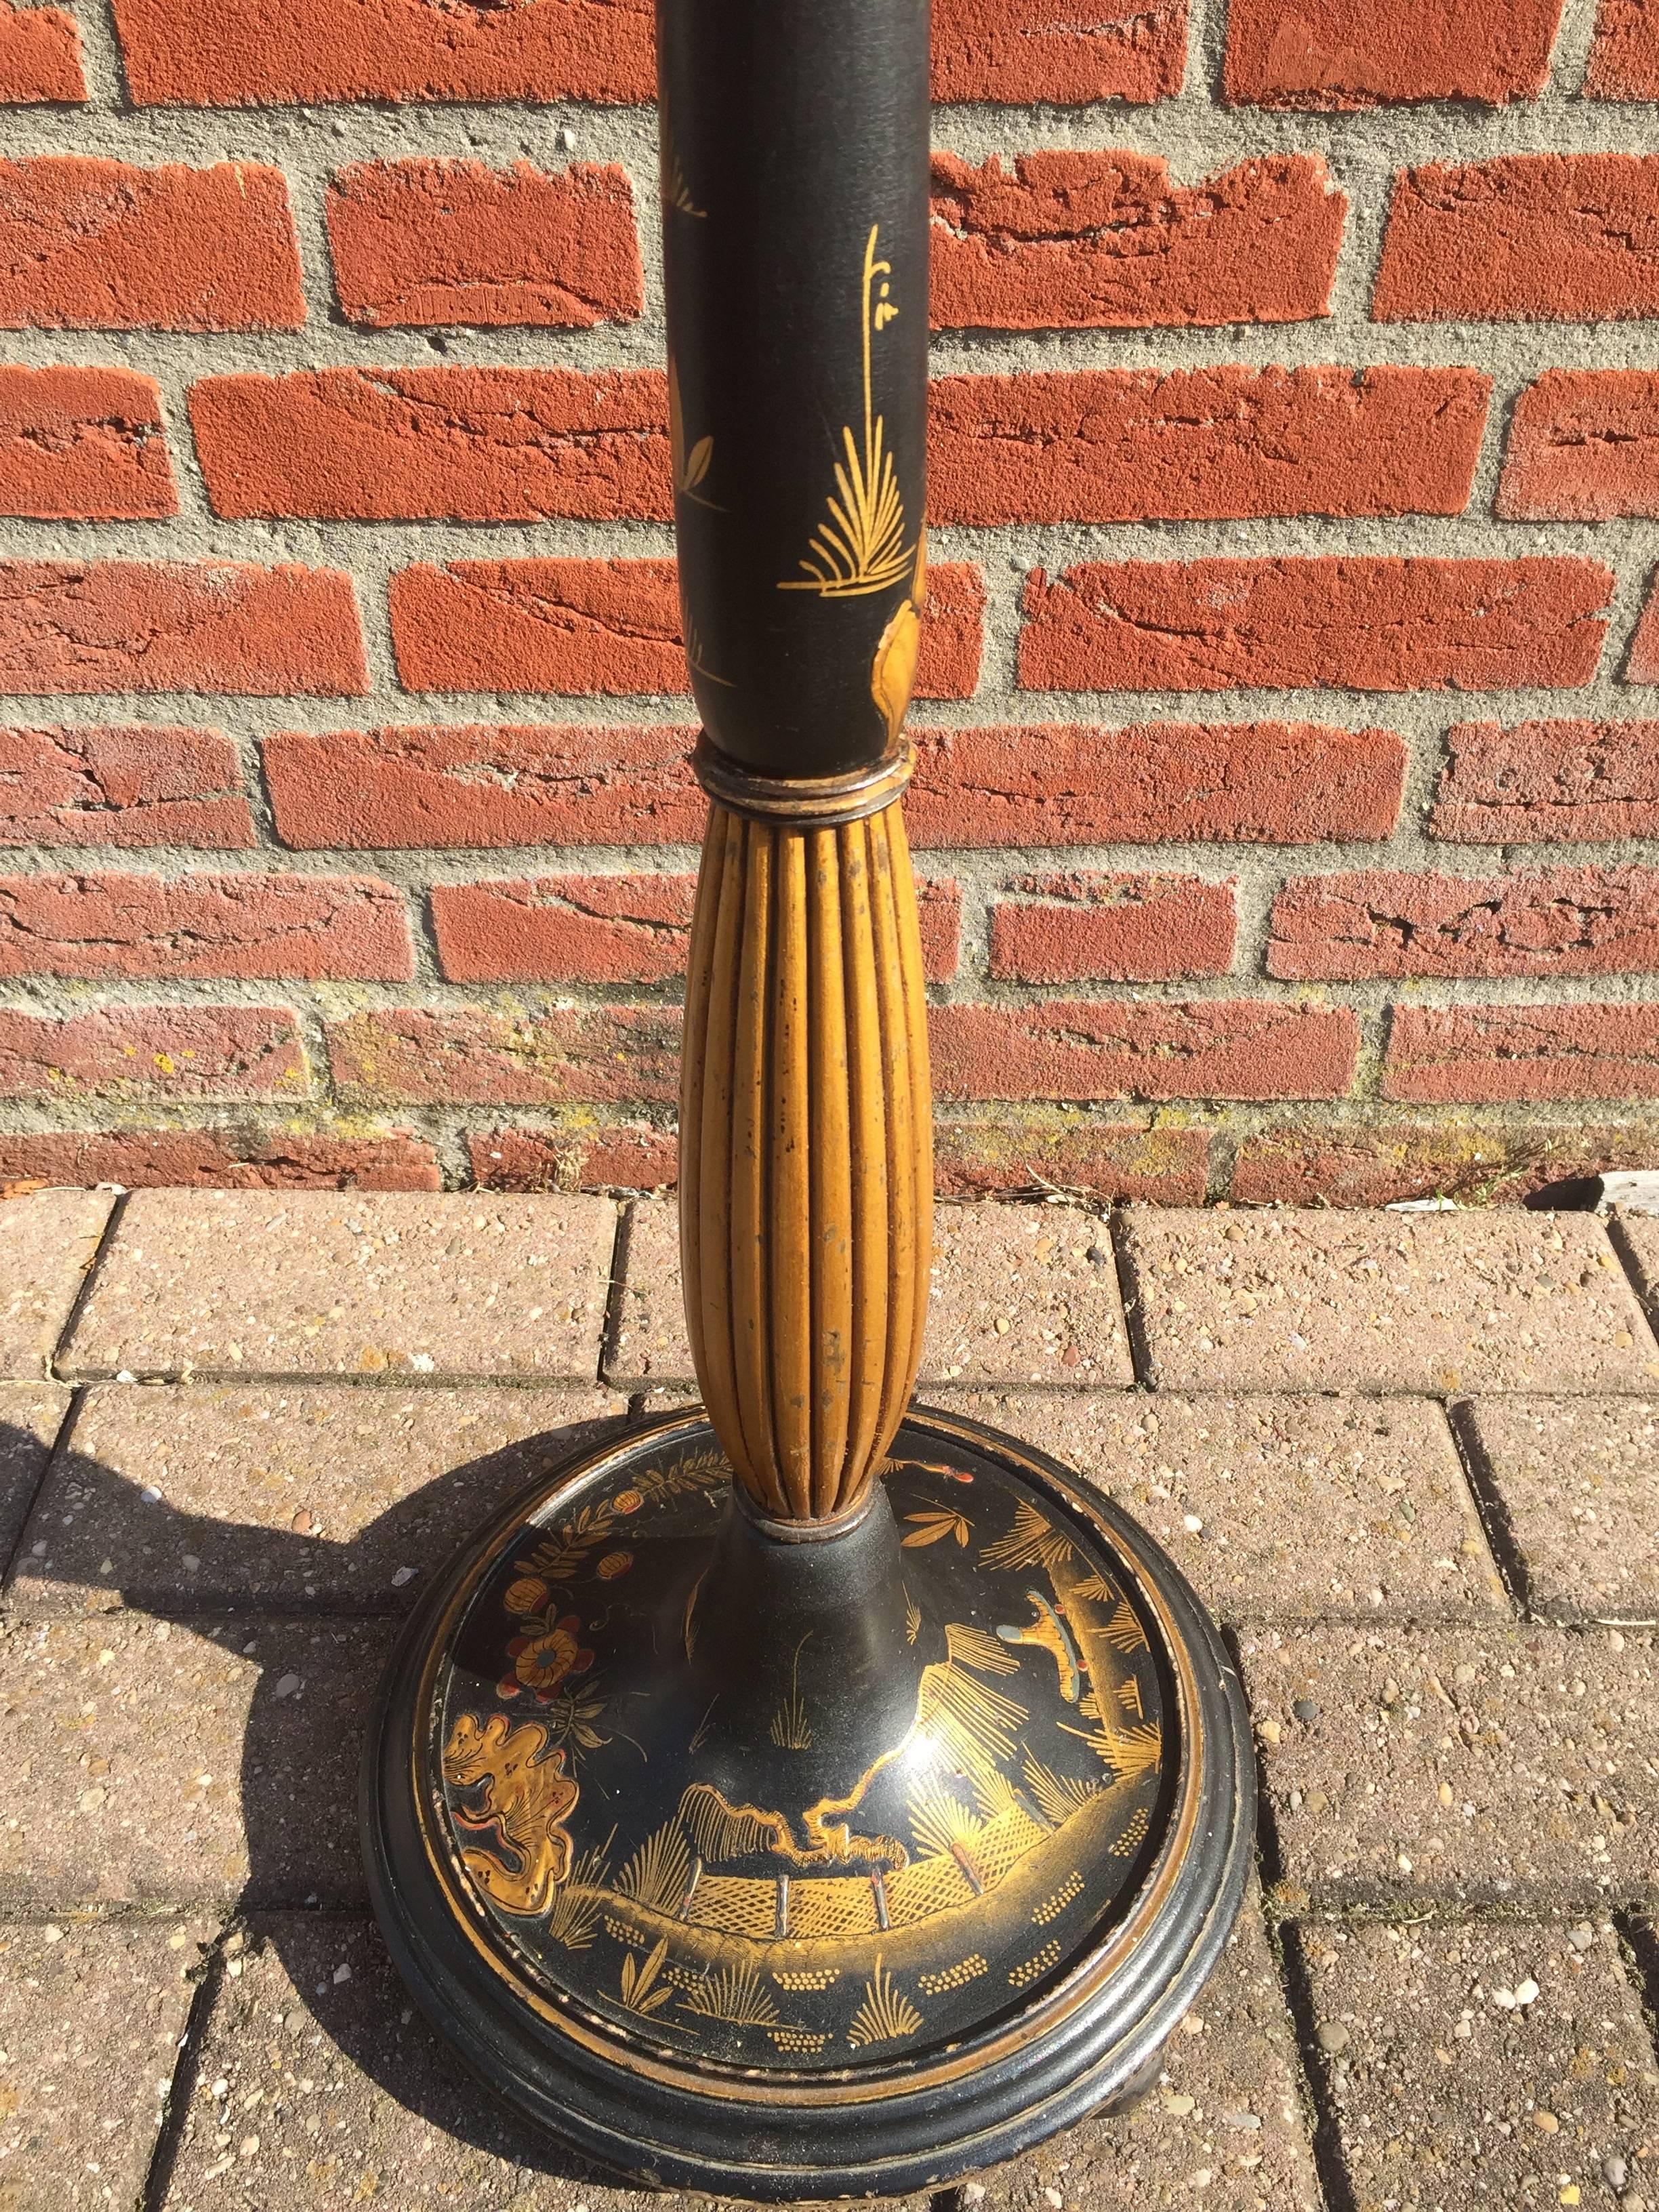 English Early 1900s Wooden Chinoiserie Floor Lamp with Lacquer Decor and Chinese Motifs